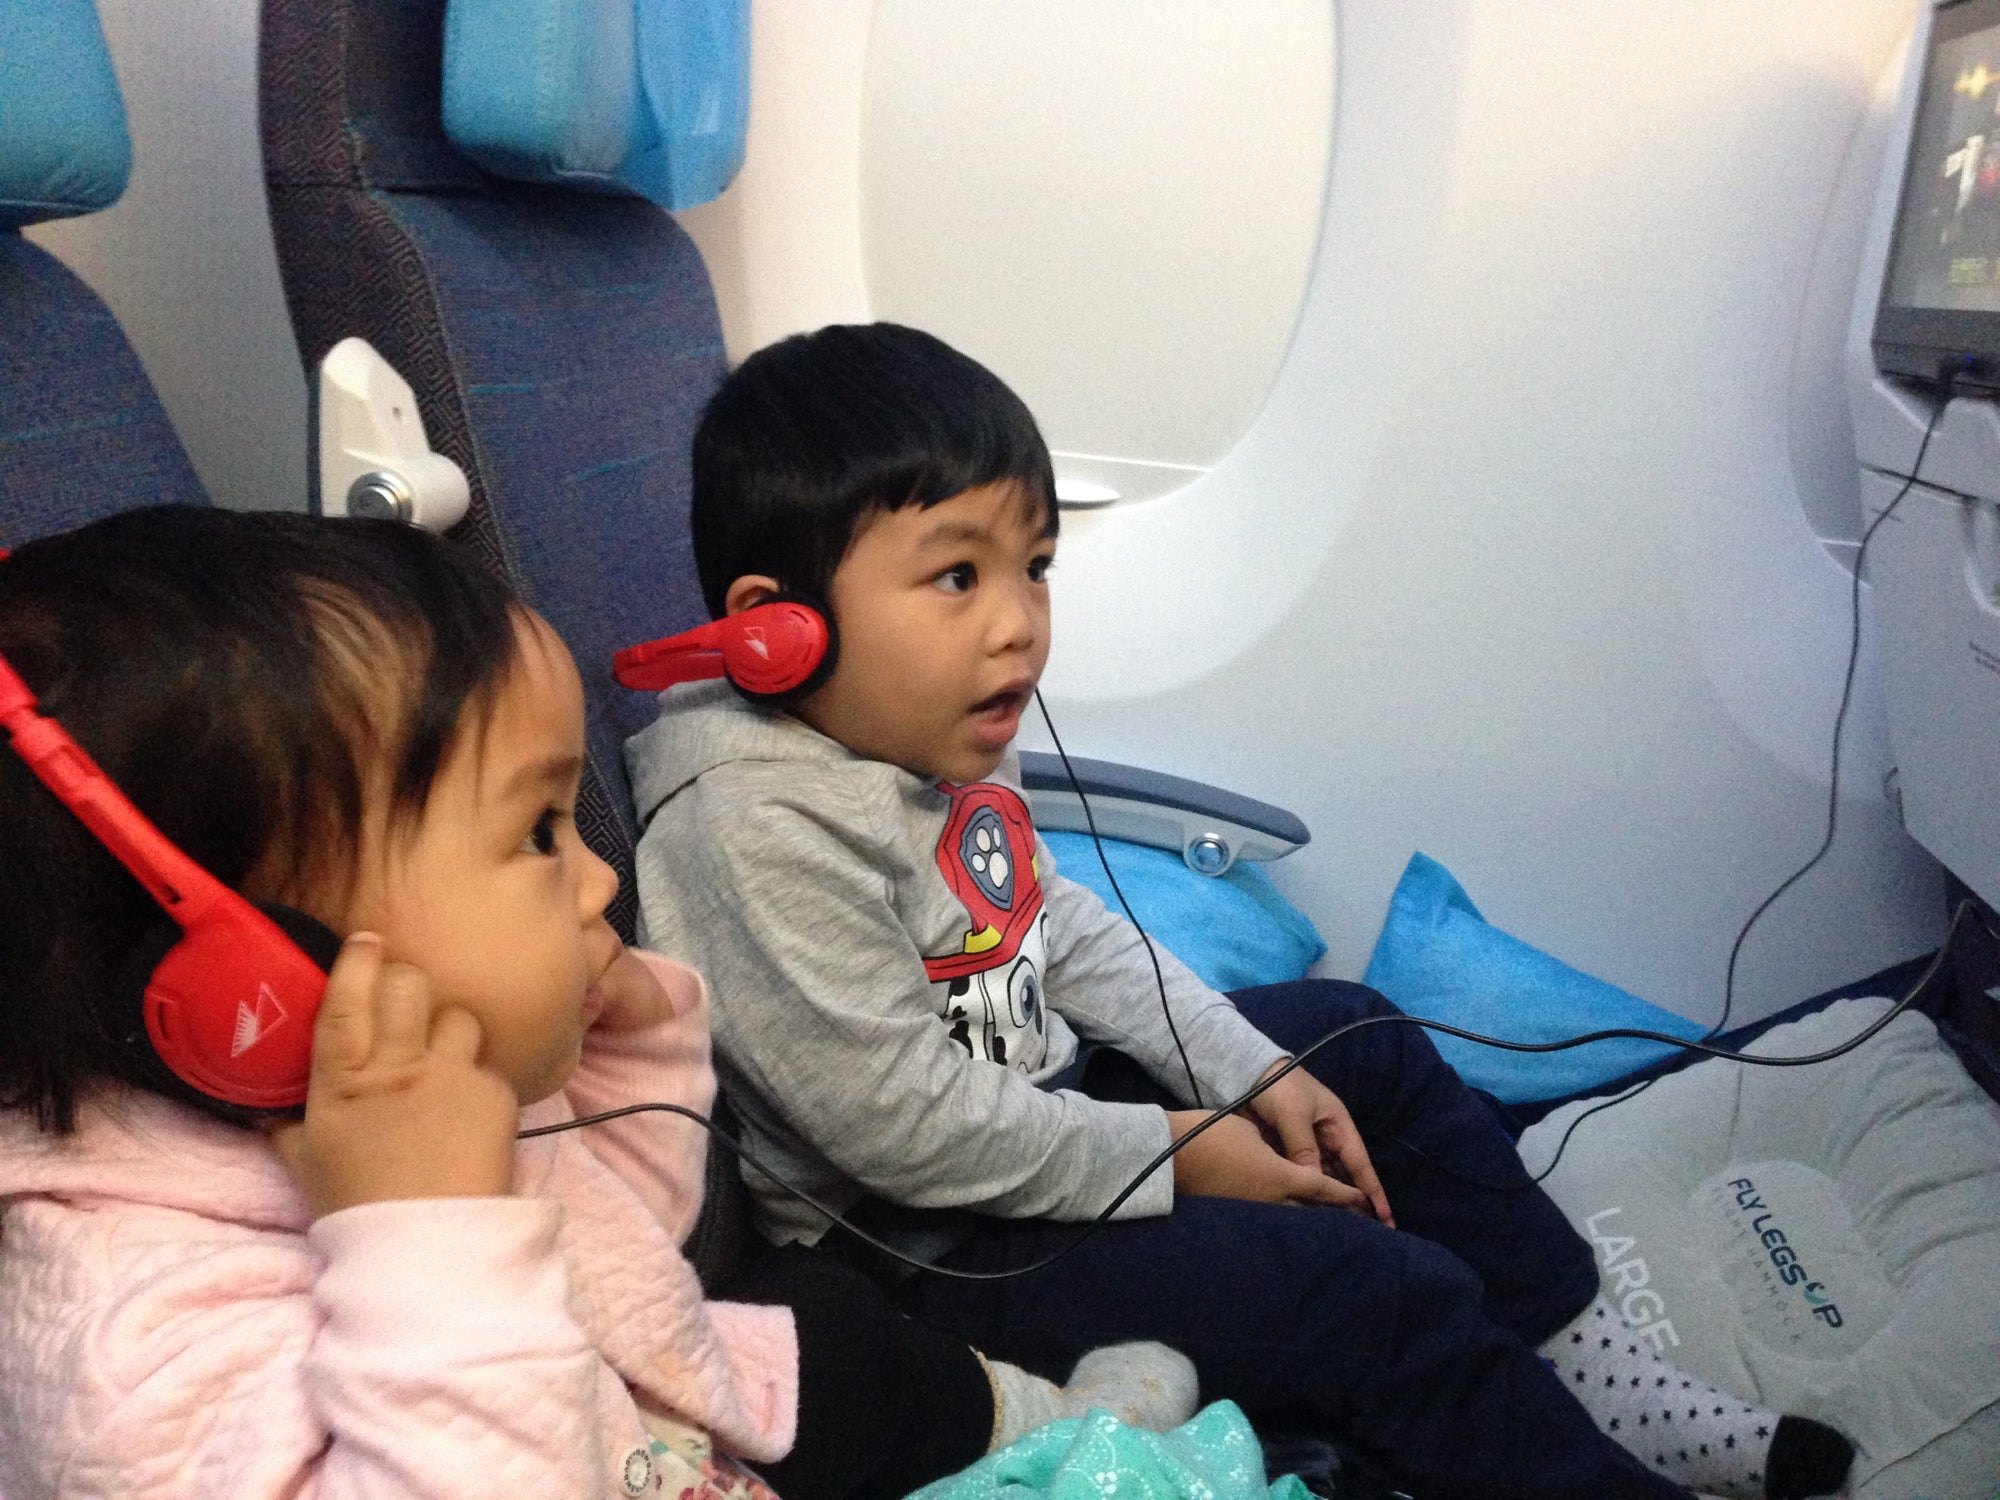 "Seems like just another typical bedtime" - Naz, Philippine Airlines